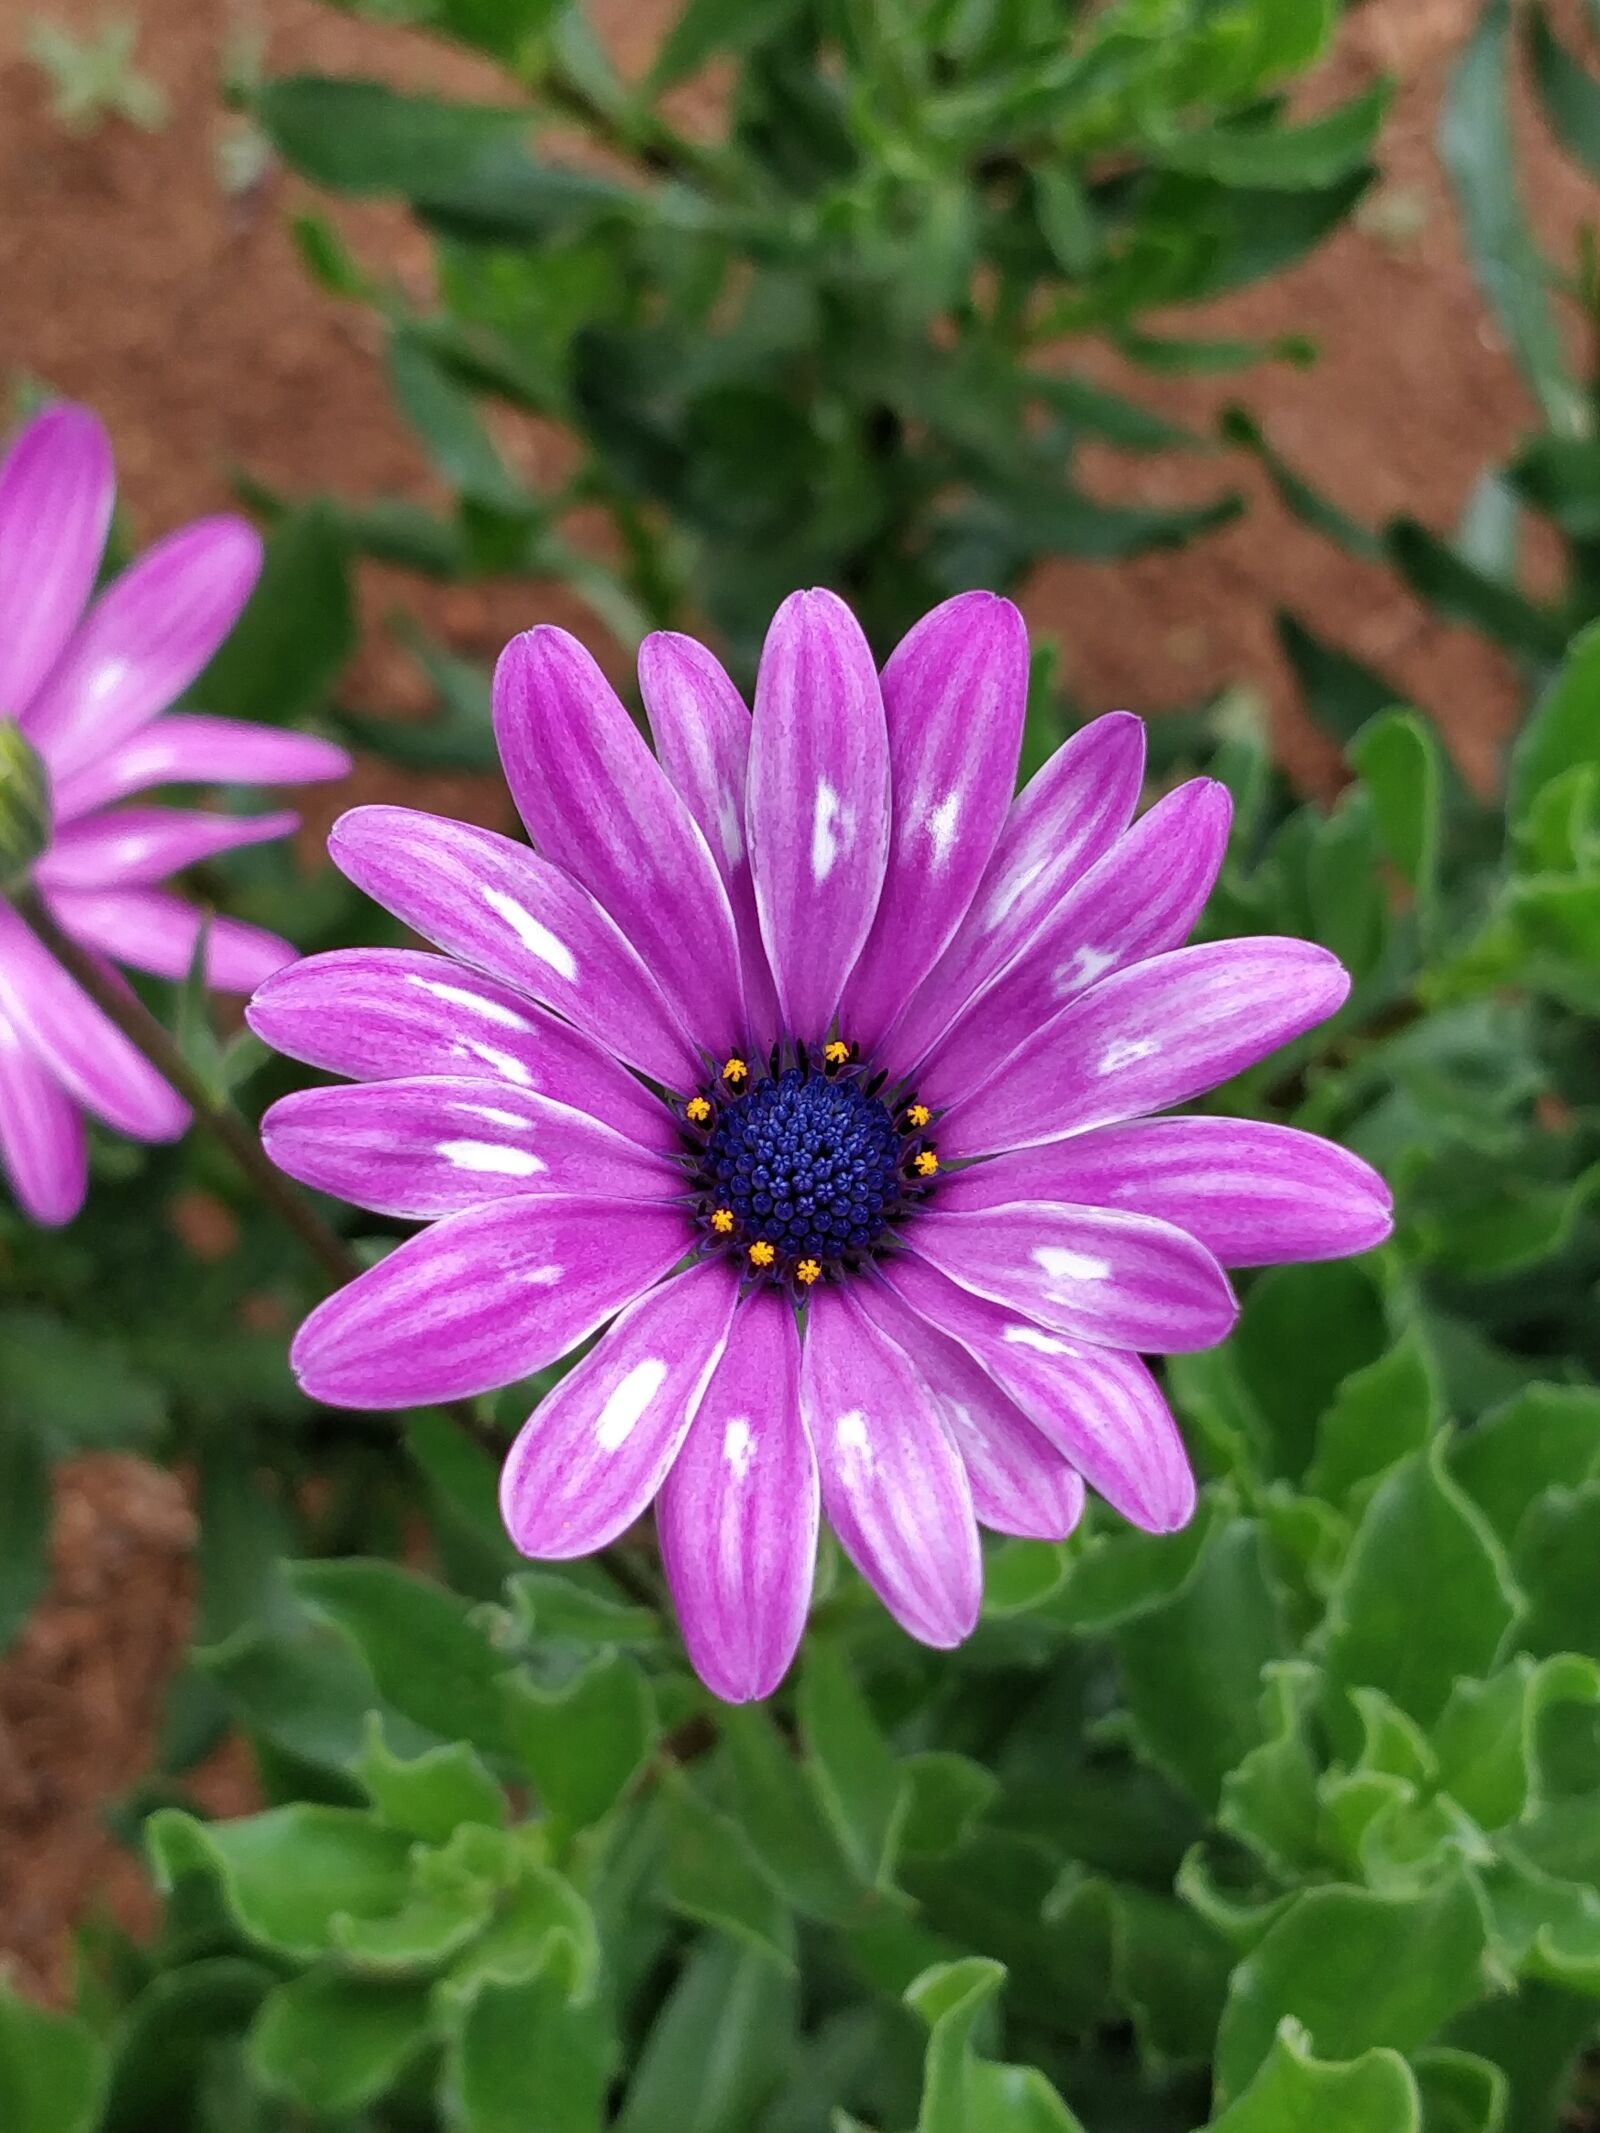 OnePlus 5T sample photo. Flower, flora, nature photography